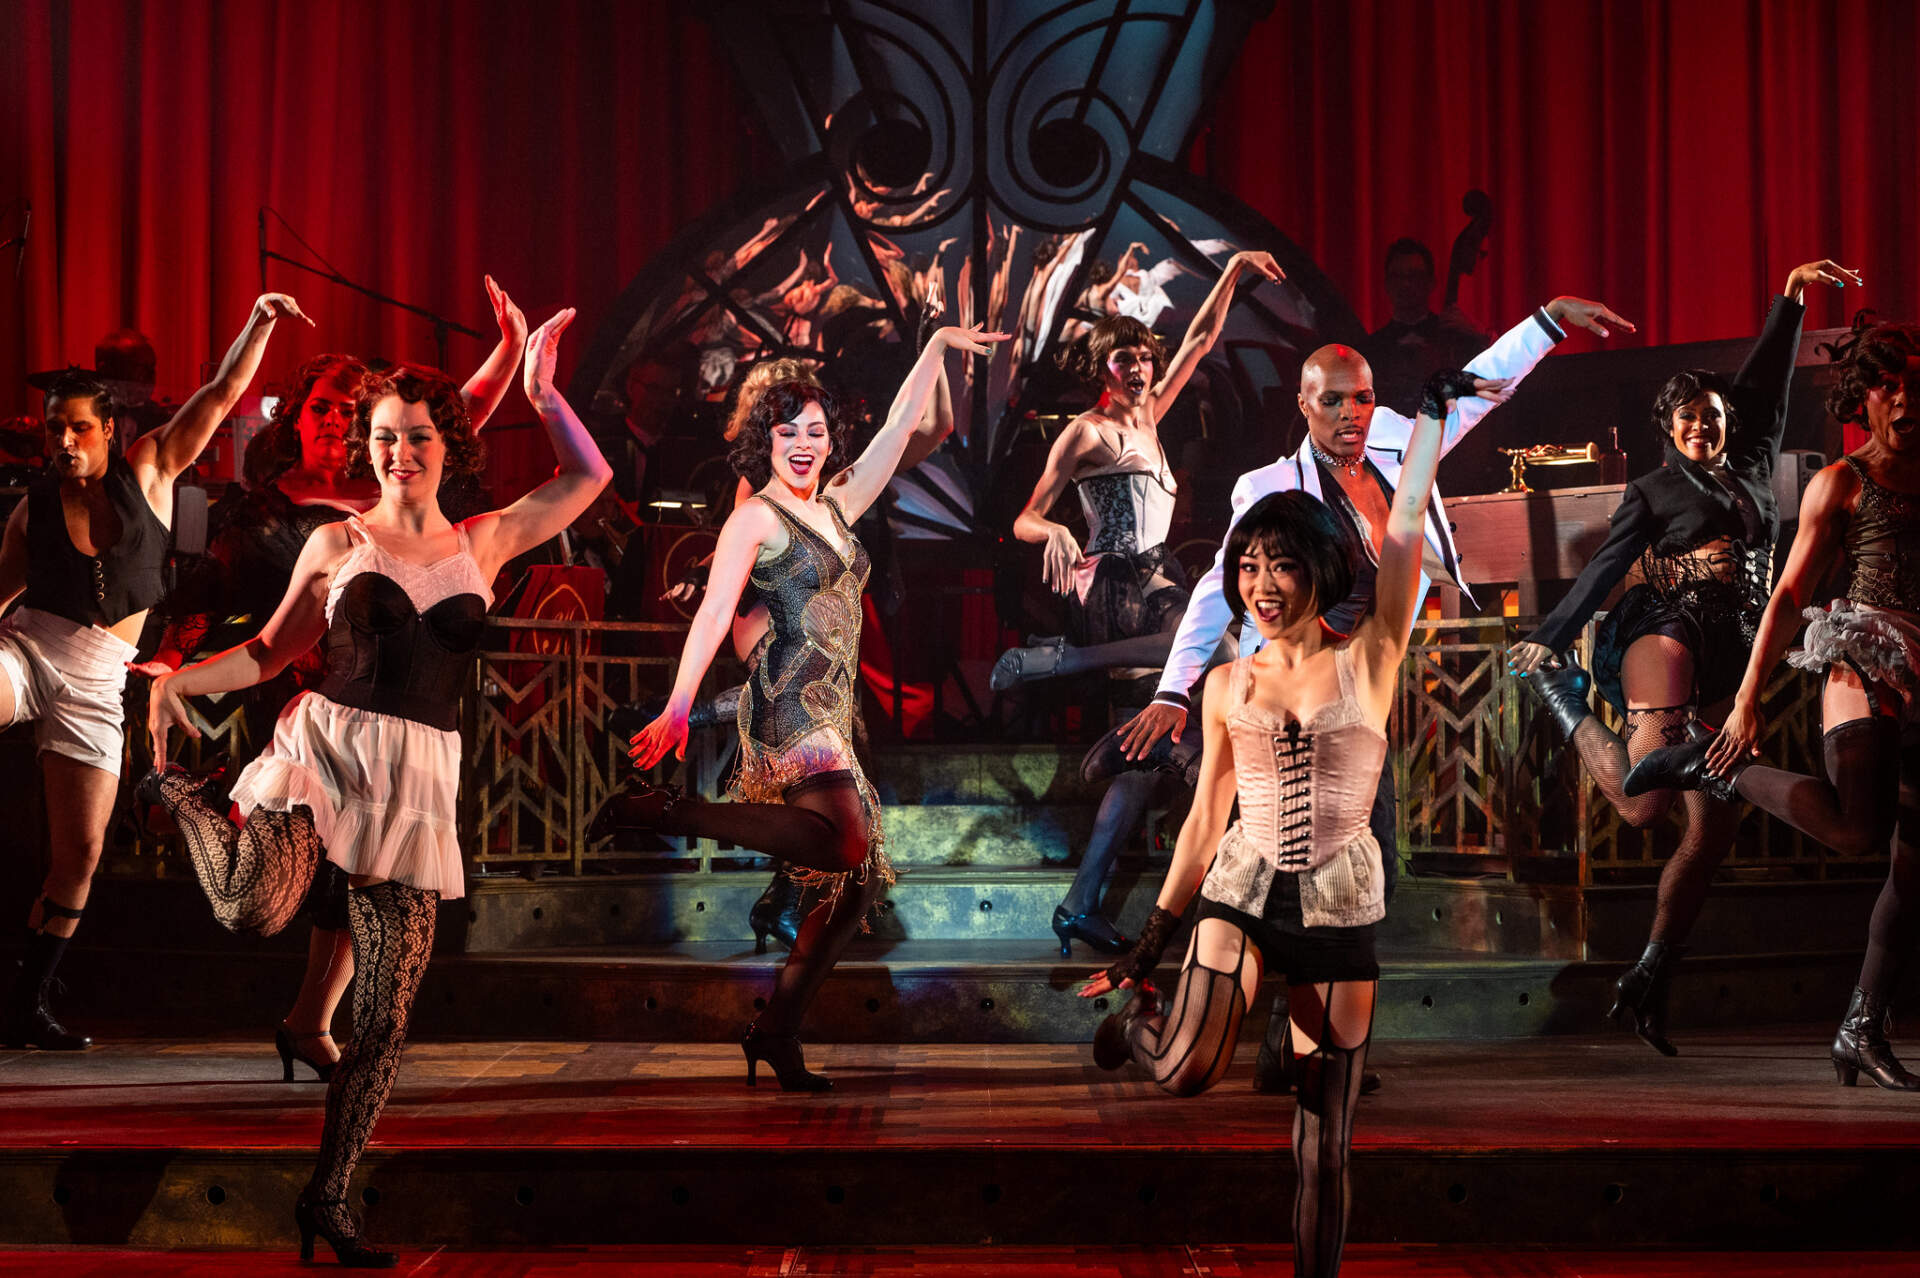 The cast of &quot;Cabaret&quot; at Barrington Stage Company. Krysta Rodriguez as Sally Bowles center. (Courtesy Daniel Rader)